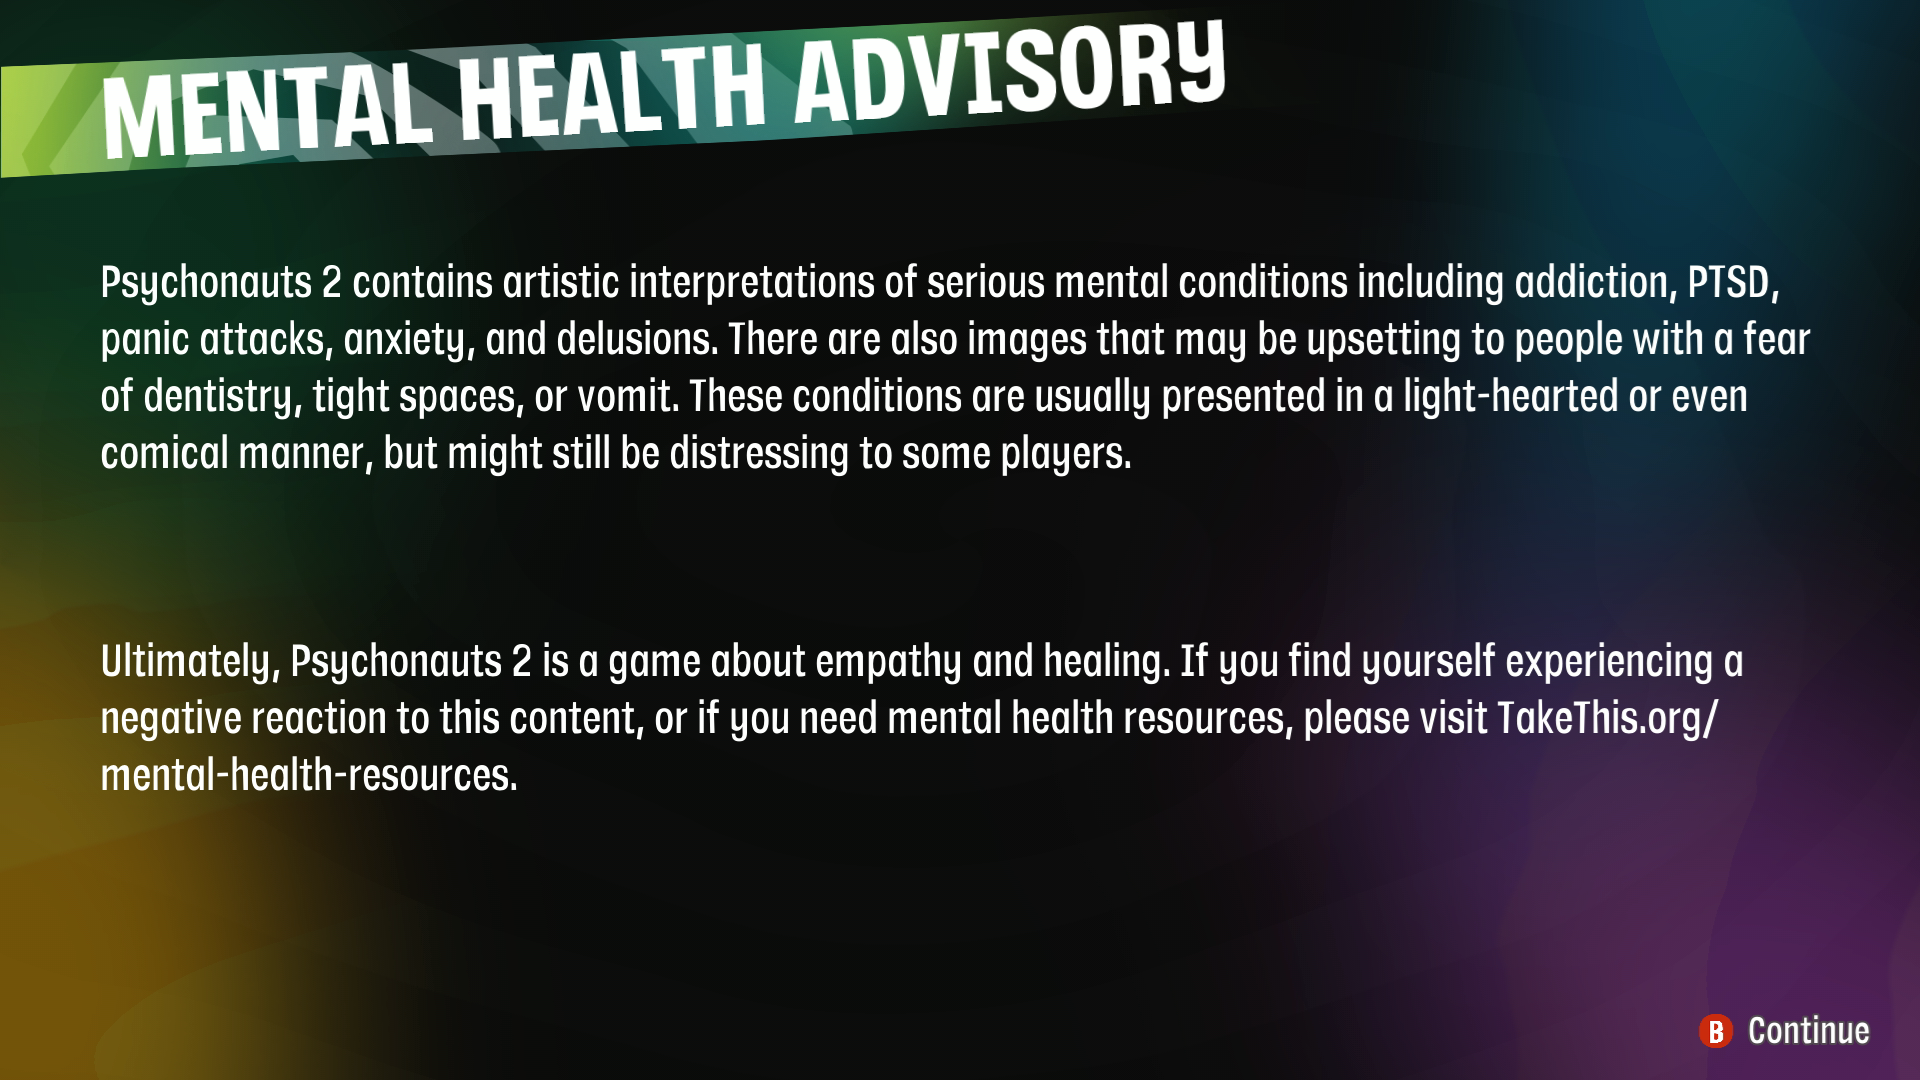 A screenshot of the Psychonauts 2 mental health advisory. The text in the advisory reads: "Psychonauts 2 contains artistic interpretations of series mental health conditions including addiction, PTSD, panic attacks, anxiety, and delusions. There are also images that may be upsetting to people with a fear of dentistry, tight spaces, or vomit. These conditions are usually presented in a light-hearted or even comical manner, but might still be distressing to some players. Ultimately, Psychonauts 2 is a game about empathy and healing. If you find yourself experiencing a negative reaction to this content, or if you need mental health resources, please visit takethis.org slash mental dash health dash resources. 